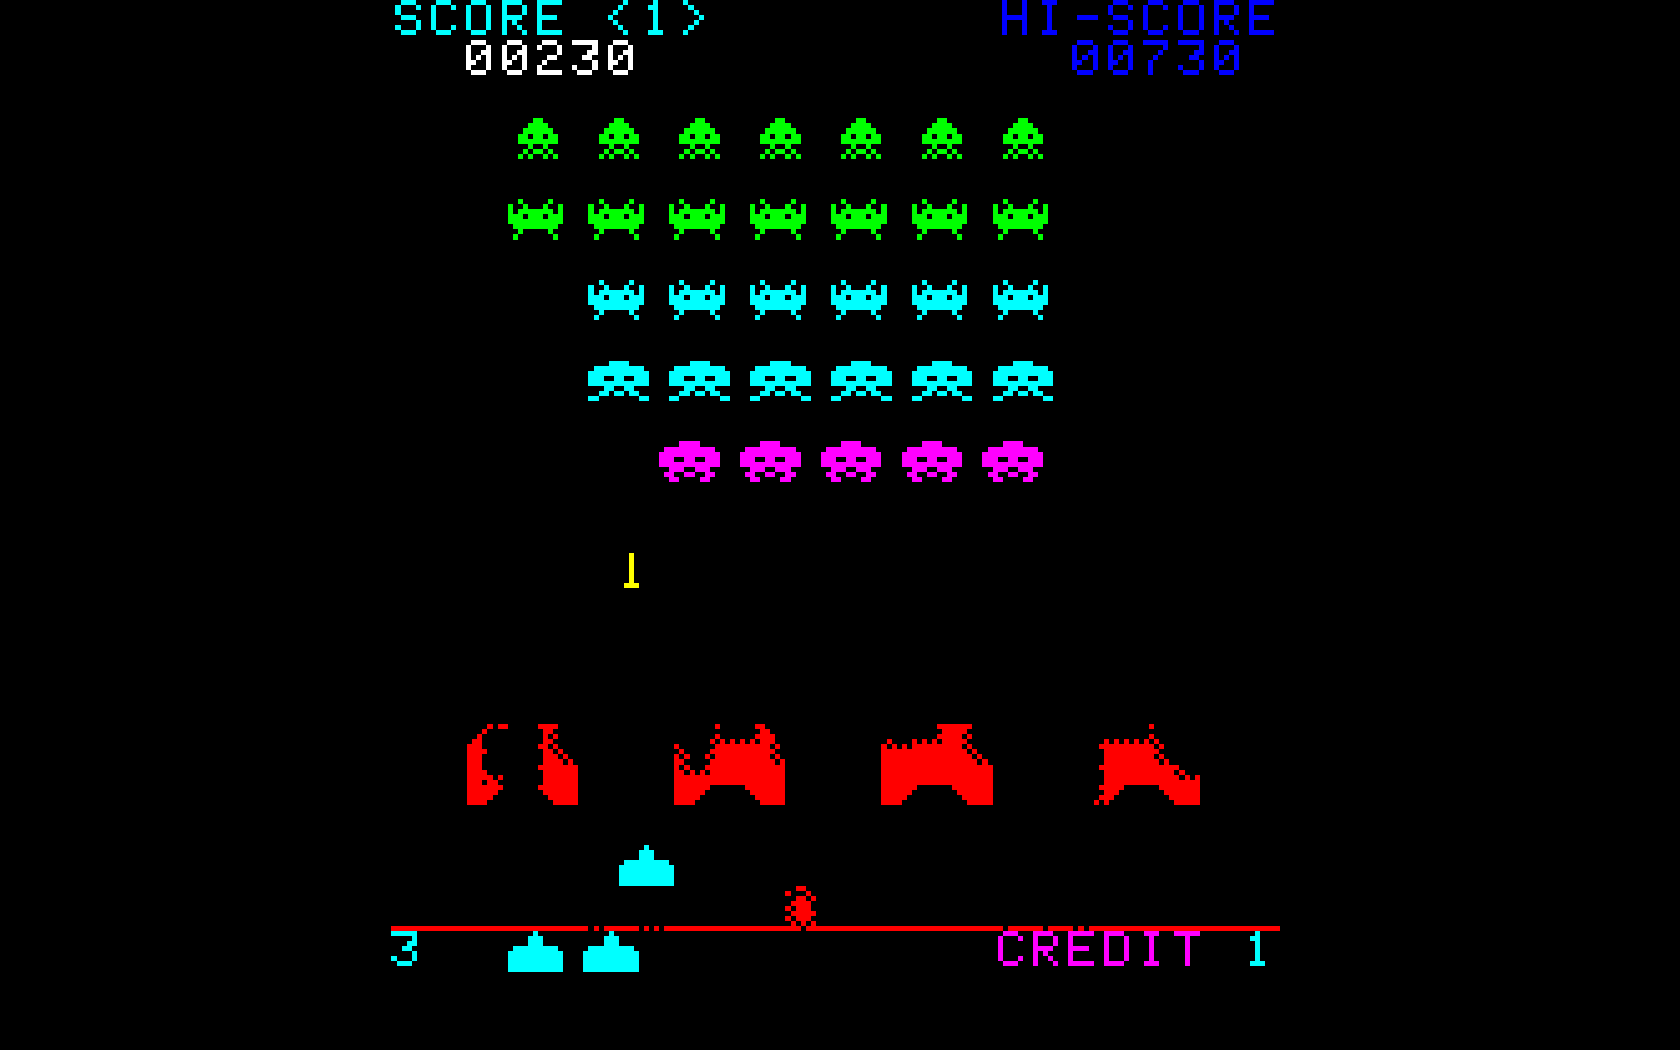 Space_Invaders_wallpaper_by_gfoyle.gif